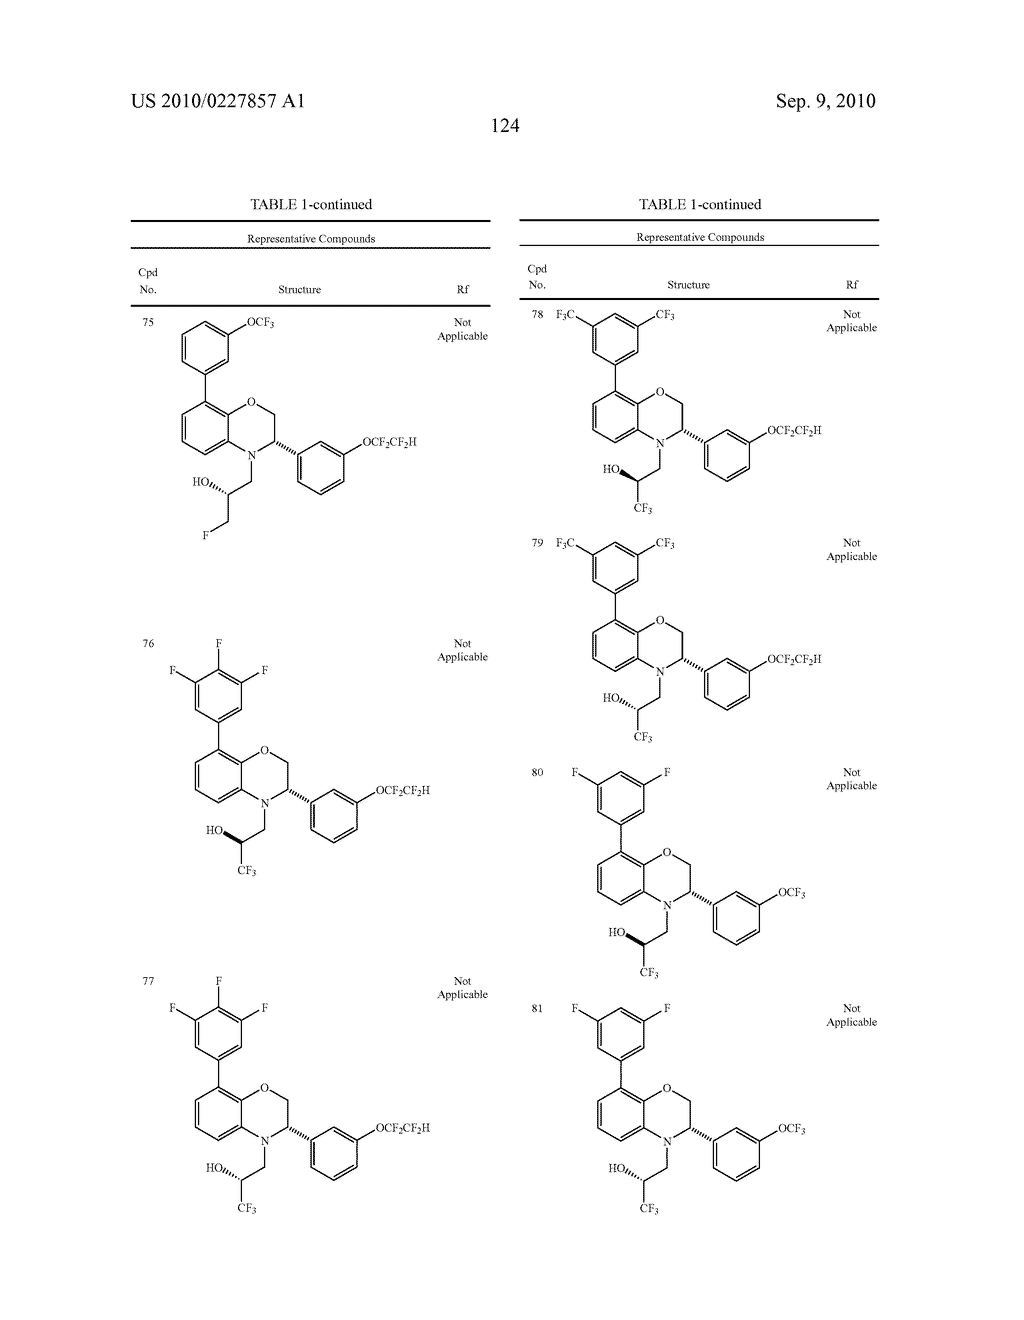 3,4-DIHYDRO-2H-BENZO[1,4]OXAZINE AND THIAZINE DERIVATIVES AS CETP INHIBITORS - diagram, schematic, and image 125